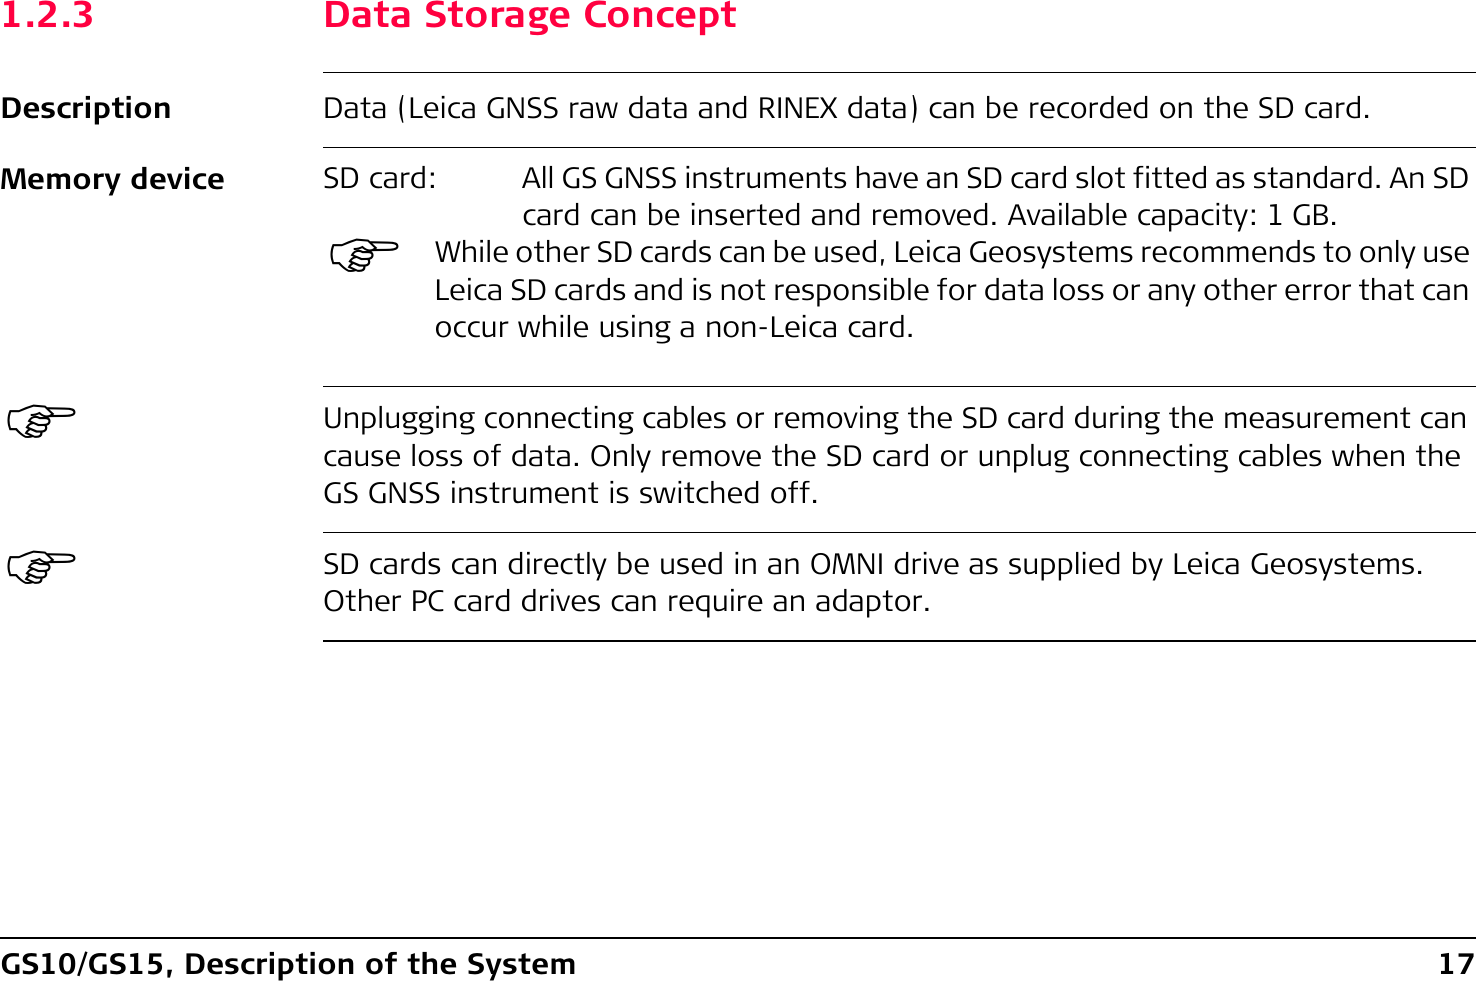 GS10/GS15, Description of the System 171.2.3 Data Storage ConceptDescription Data (Leica GNSS raw data and RINEX data) can be recorded on the SD card.Memory device)Unplugging connecting cables or removing the SD card during the measurement can cause loss of data. Only remove the SD card or unplug connecting cables when the GS GNSS instrument is switched off.)SD cards can directly be used in an OMNI drive as supplied by Leica Geosystems. Other PC card drives can require an adaptor.SD card: All GS GNSS instruments have an SD card slot fitted as standard. An SD card can be inserted and removed. Available capacity: 1 GB.)While other SD cards can be used, Leica Geosystems recommends to only use Leica SD cards and is not responsible for data loss or any other error that can occur while using a non-Leica card.